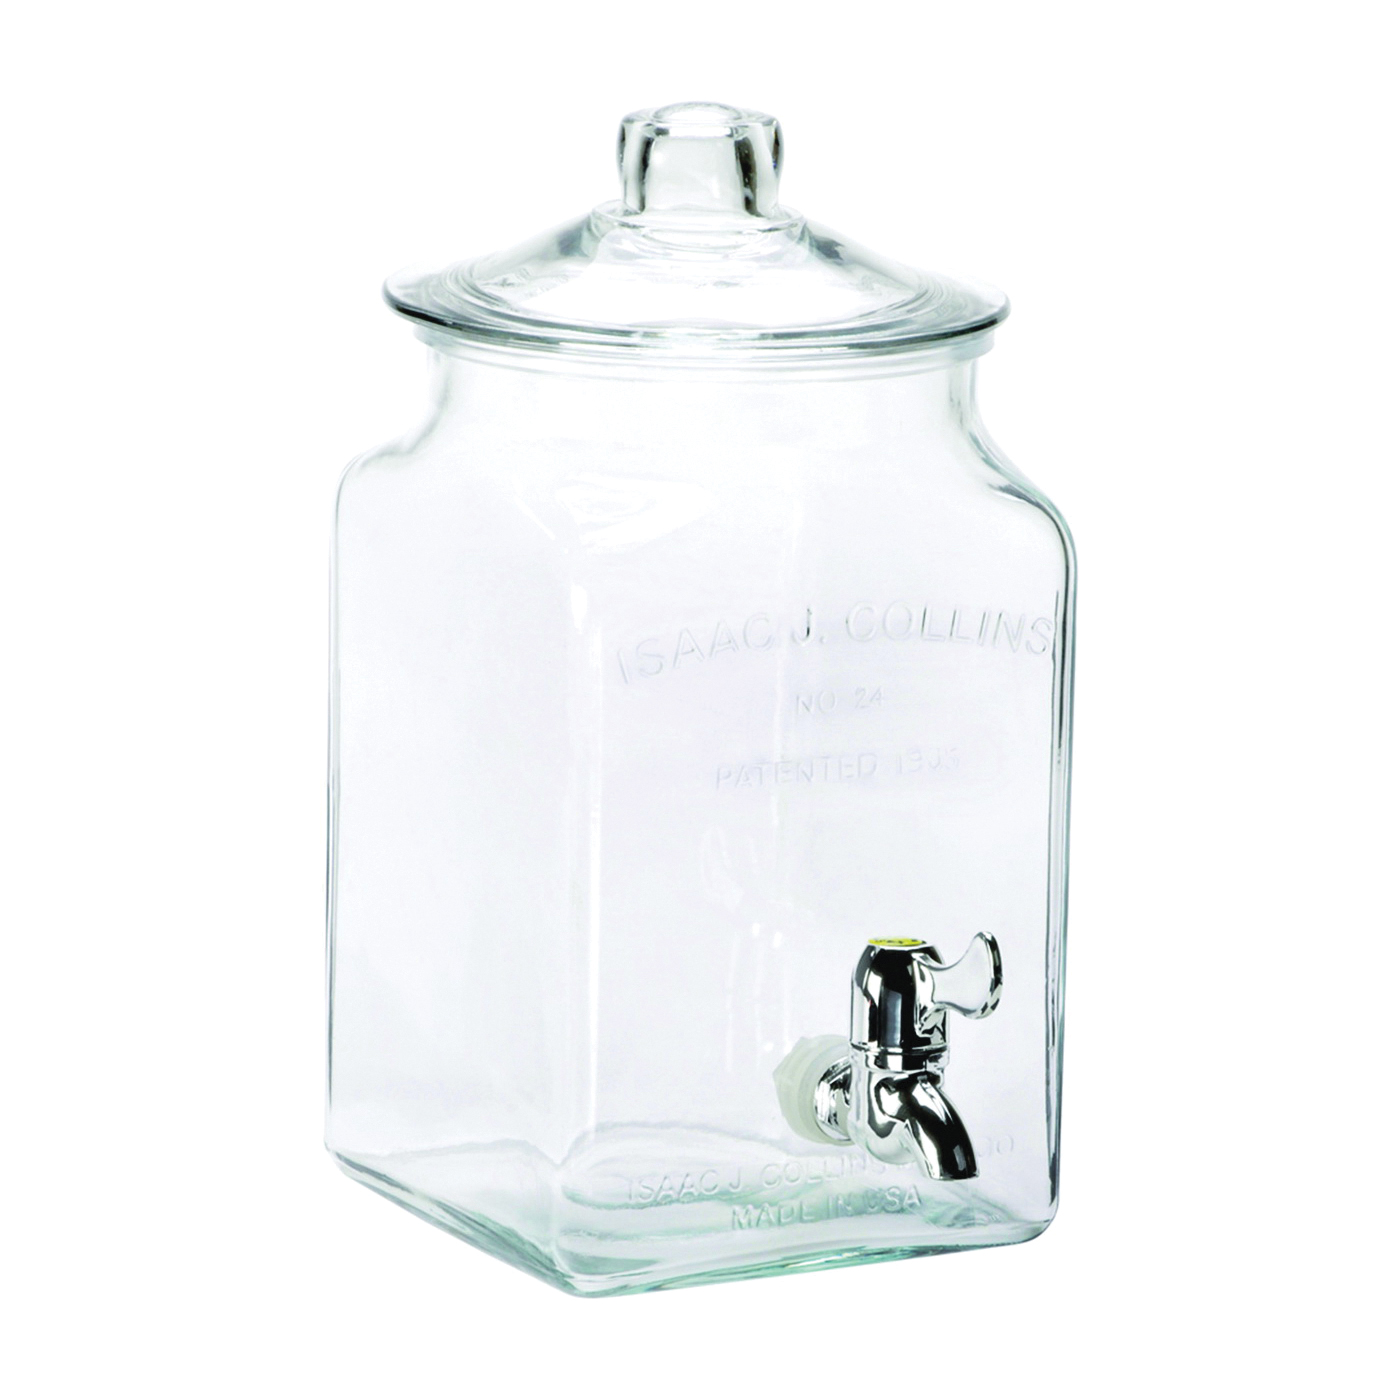 Oneida 93474 Beverage Dispenser, 1.5 gal Capacity, Glass Container, Clear - 1